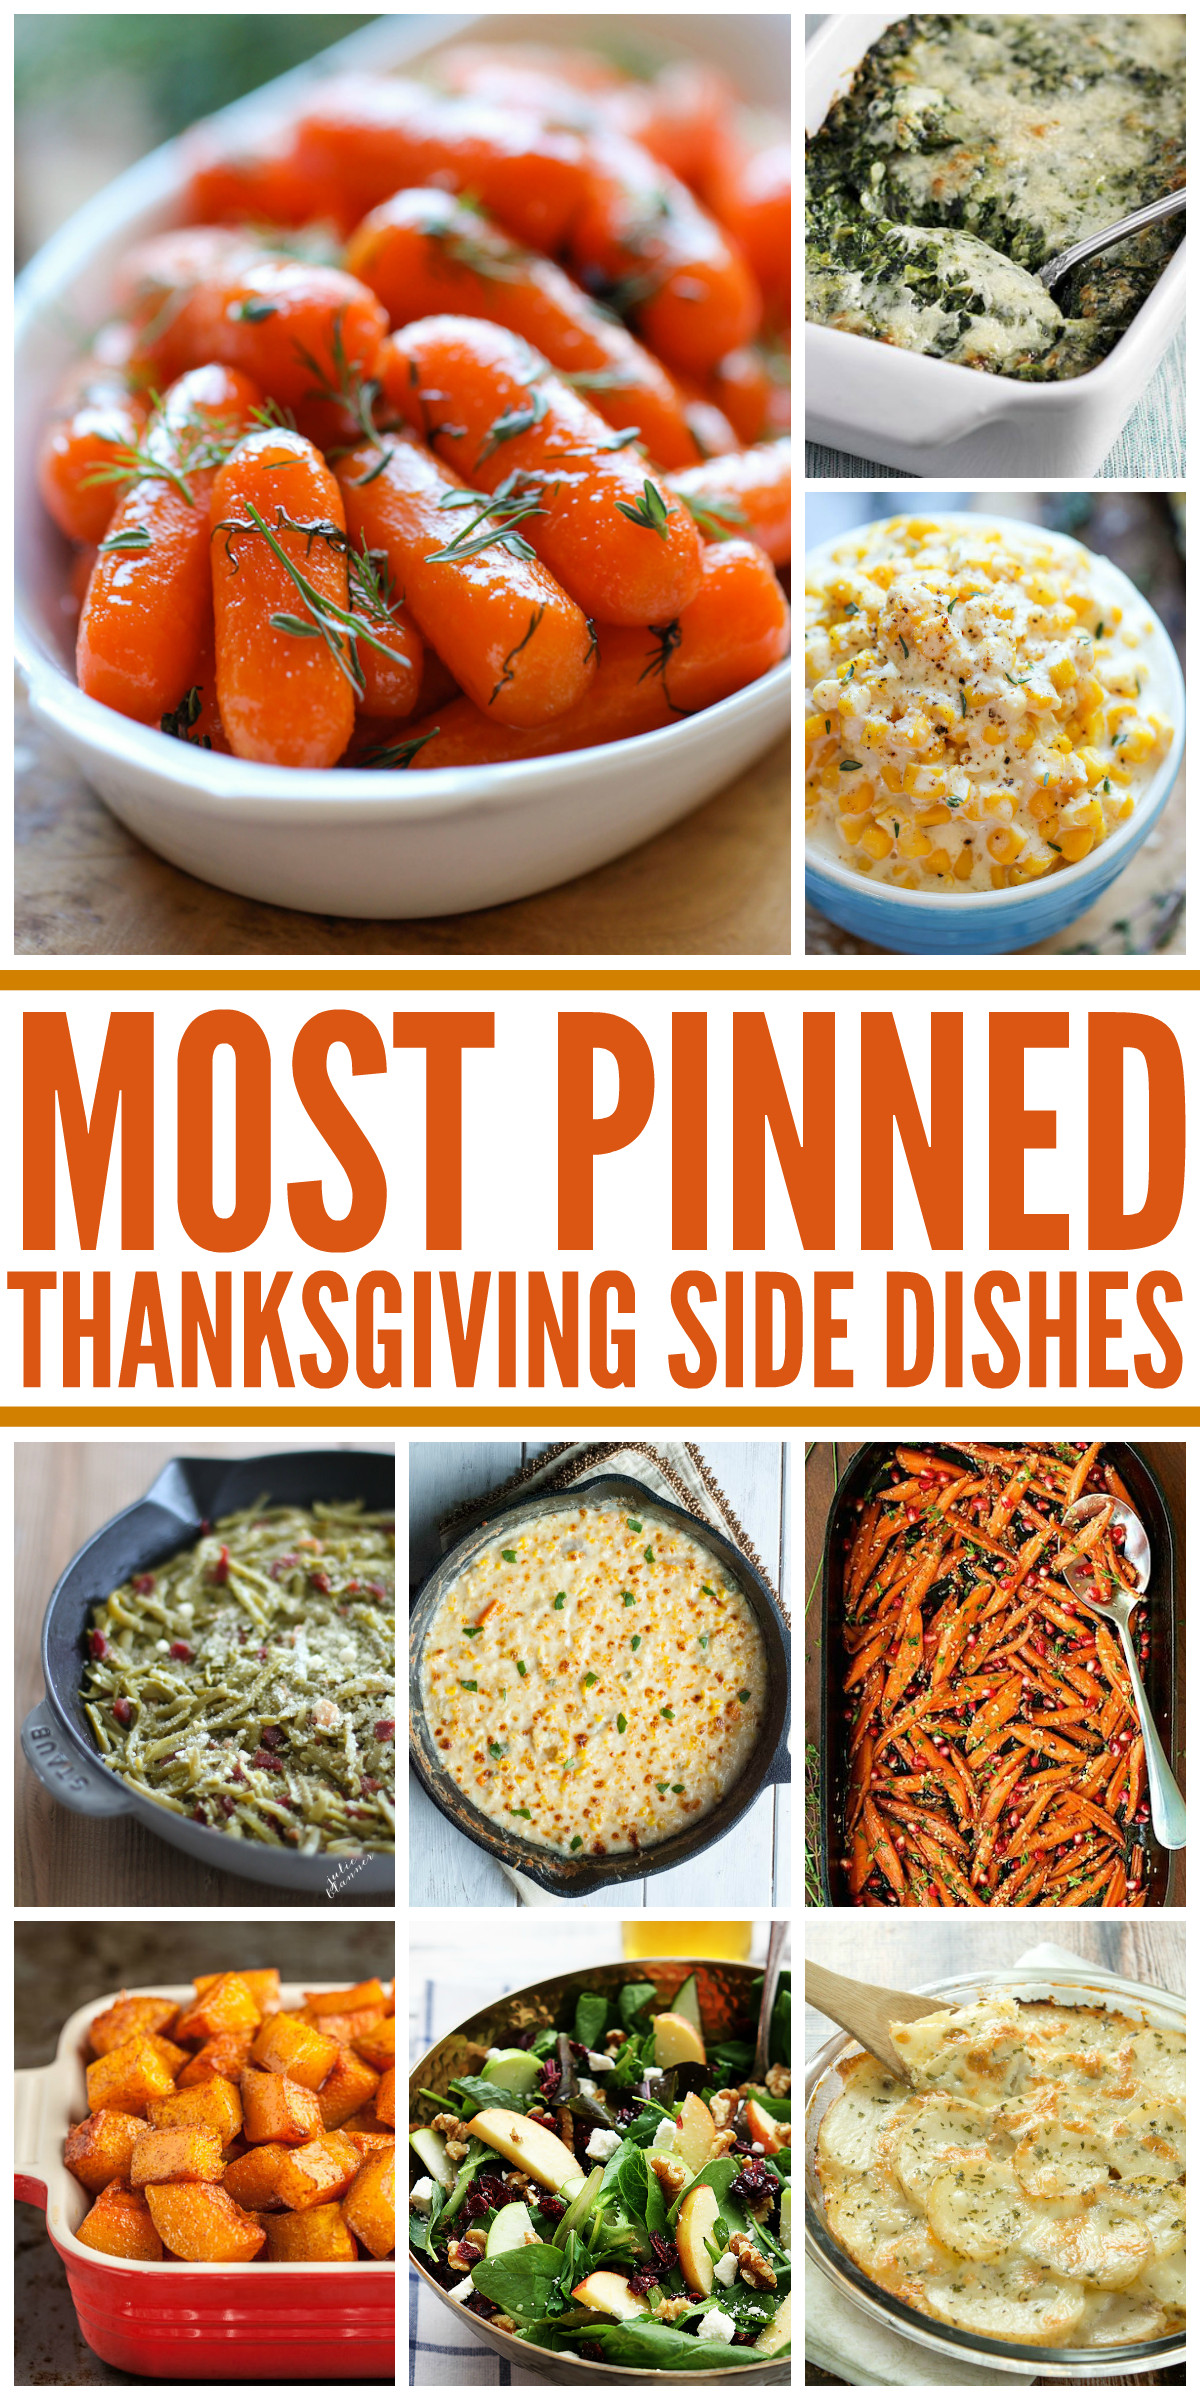 Thanksgiving Dinner Recipes
 25 Most Pinned Holiday Side Dishes